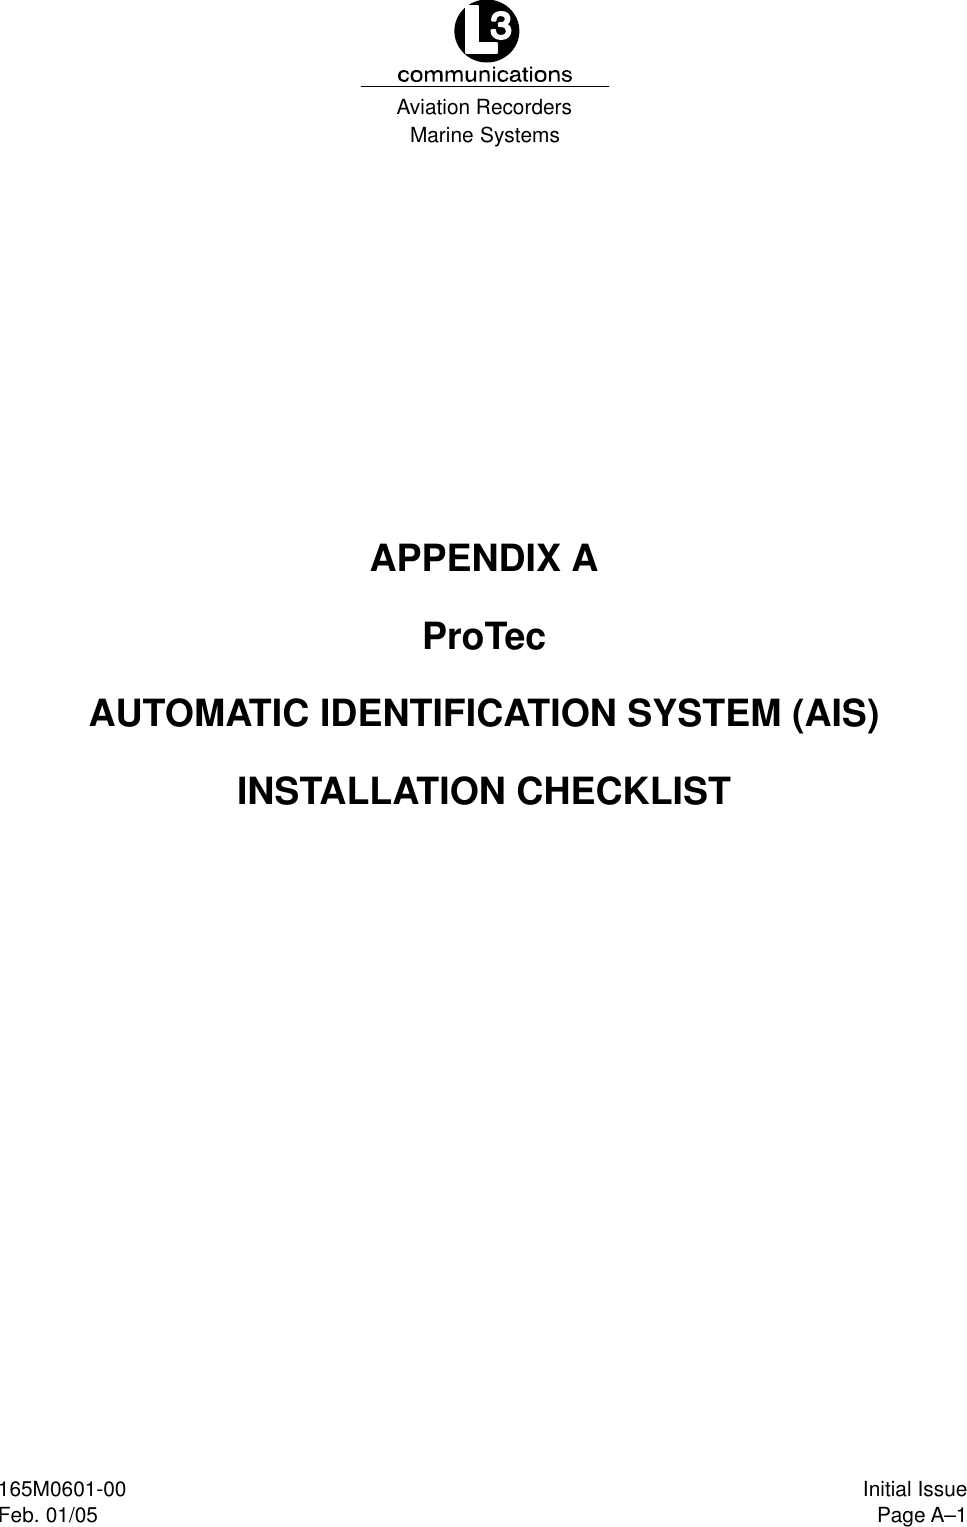 Marine SystemsAviation RecordersPage A–1Initial IssueFeb. 01/05165M0601-00APPENDIX AProTecAUTOMATIC IDENTIFICATION SYSTEM (AIS)INSTALLATION CHECKLIST